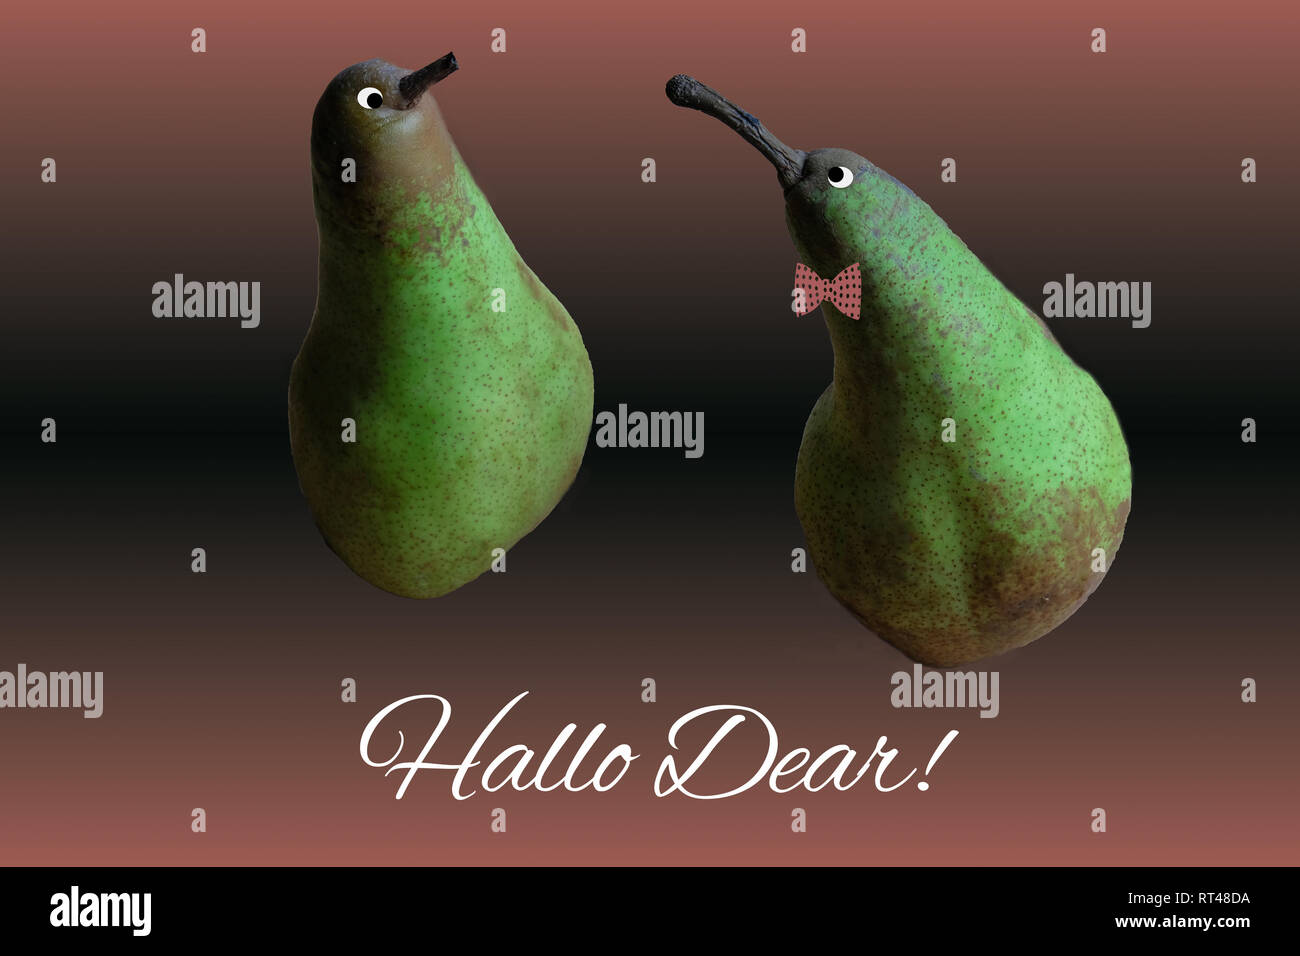 Two funny pears as a easter chicken greeting card Stock Photo